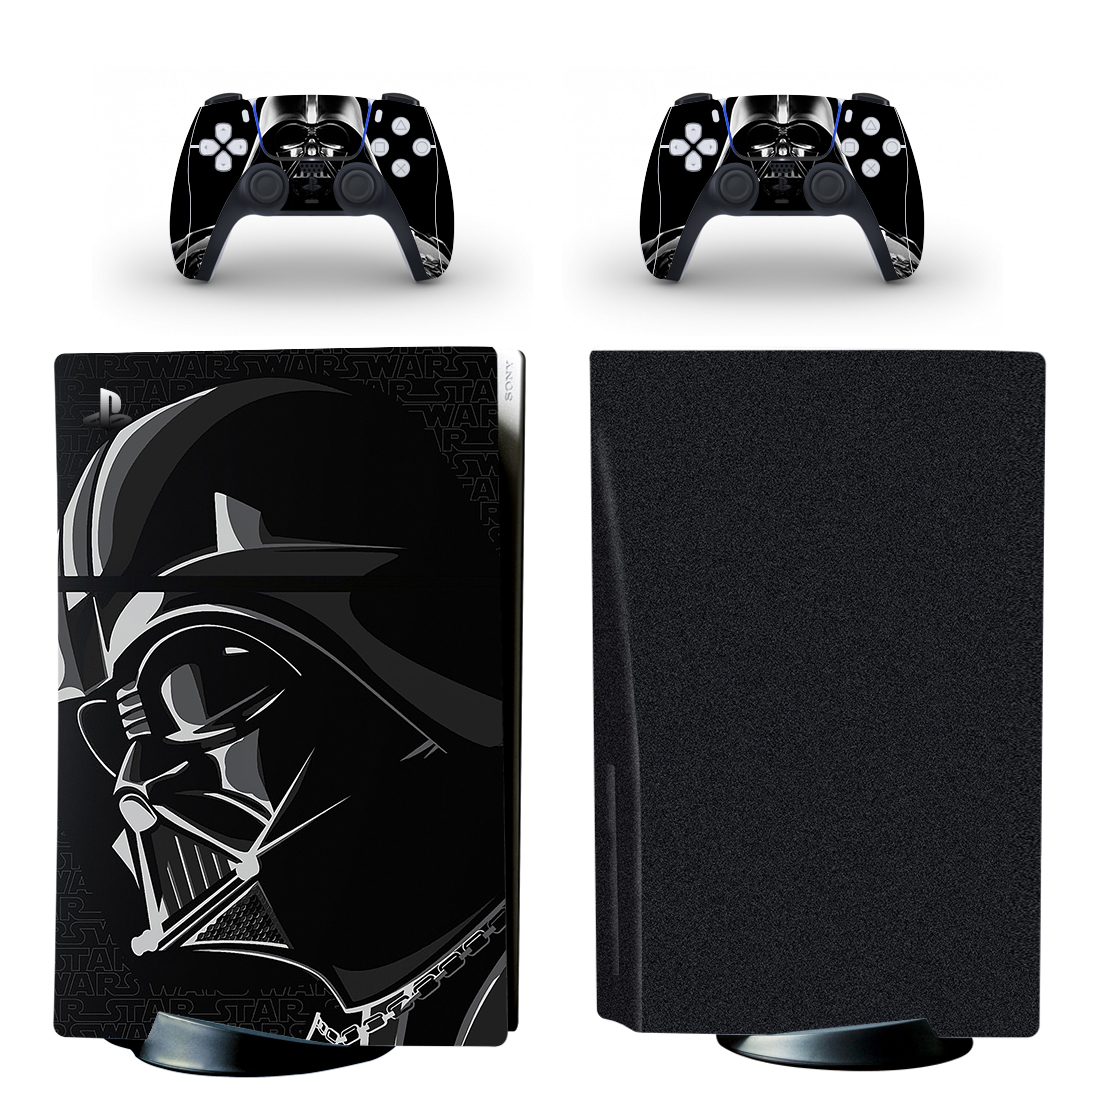 Star Wars Darth Vader PS5 Skin Sticker And Controllers Design 1